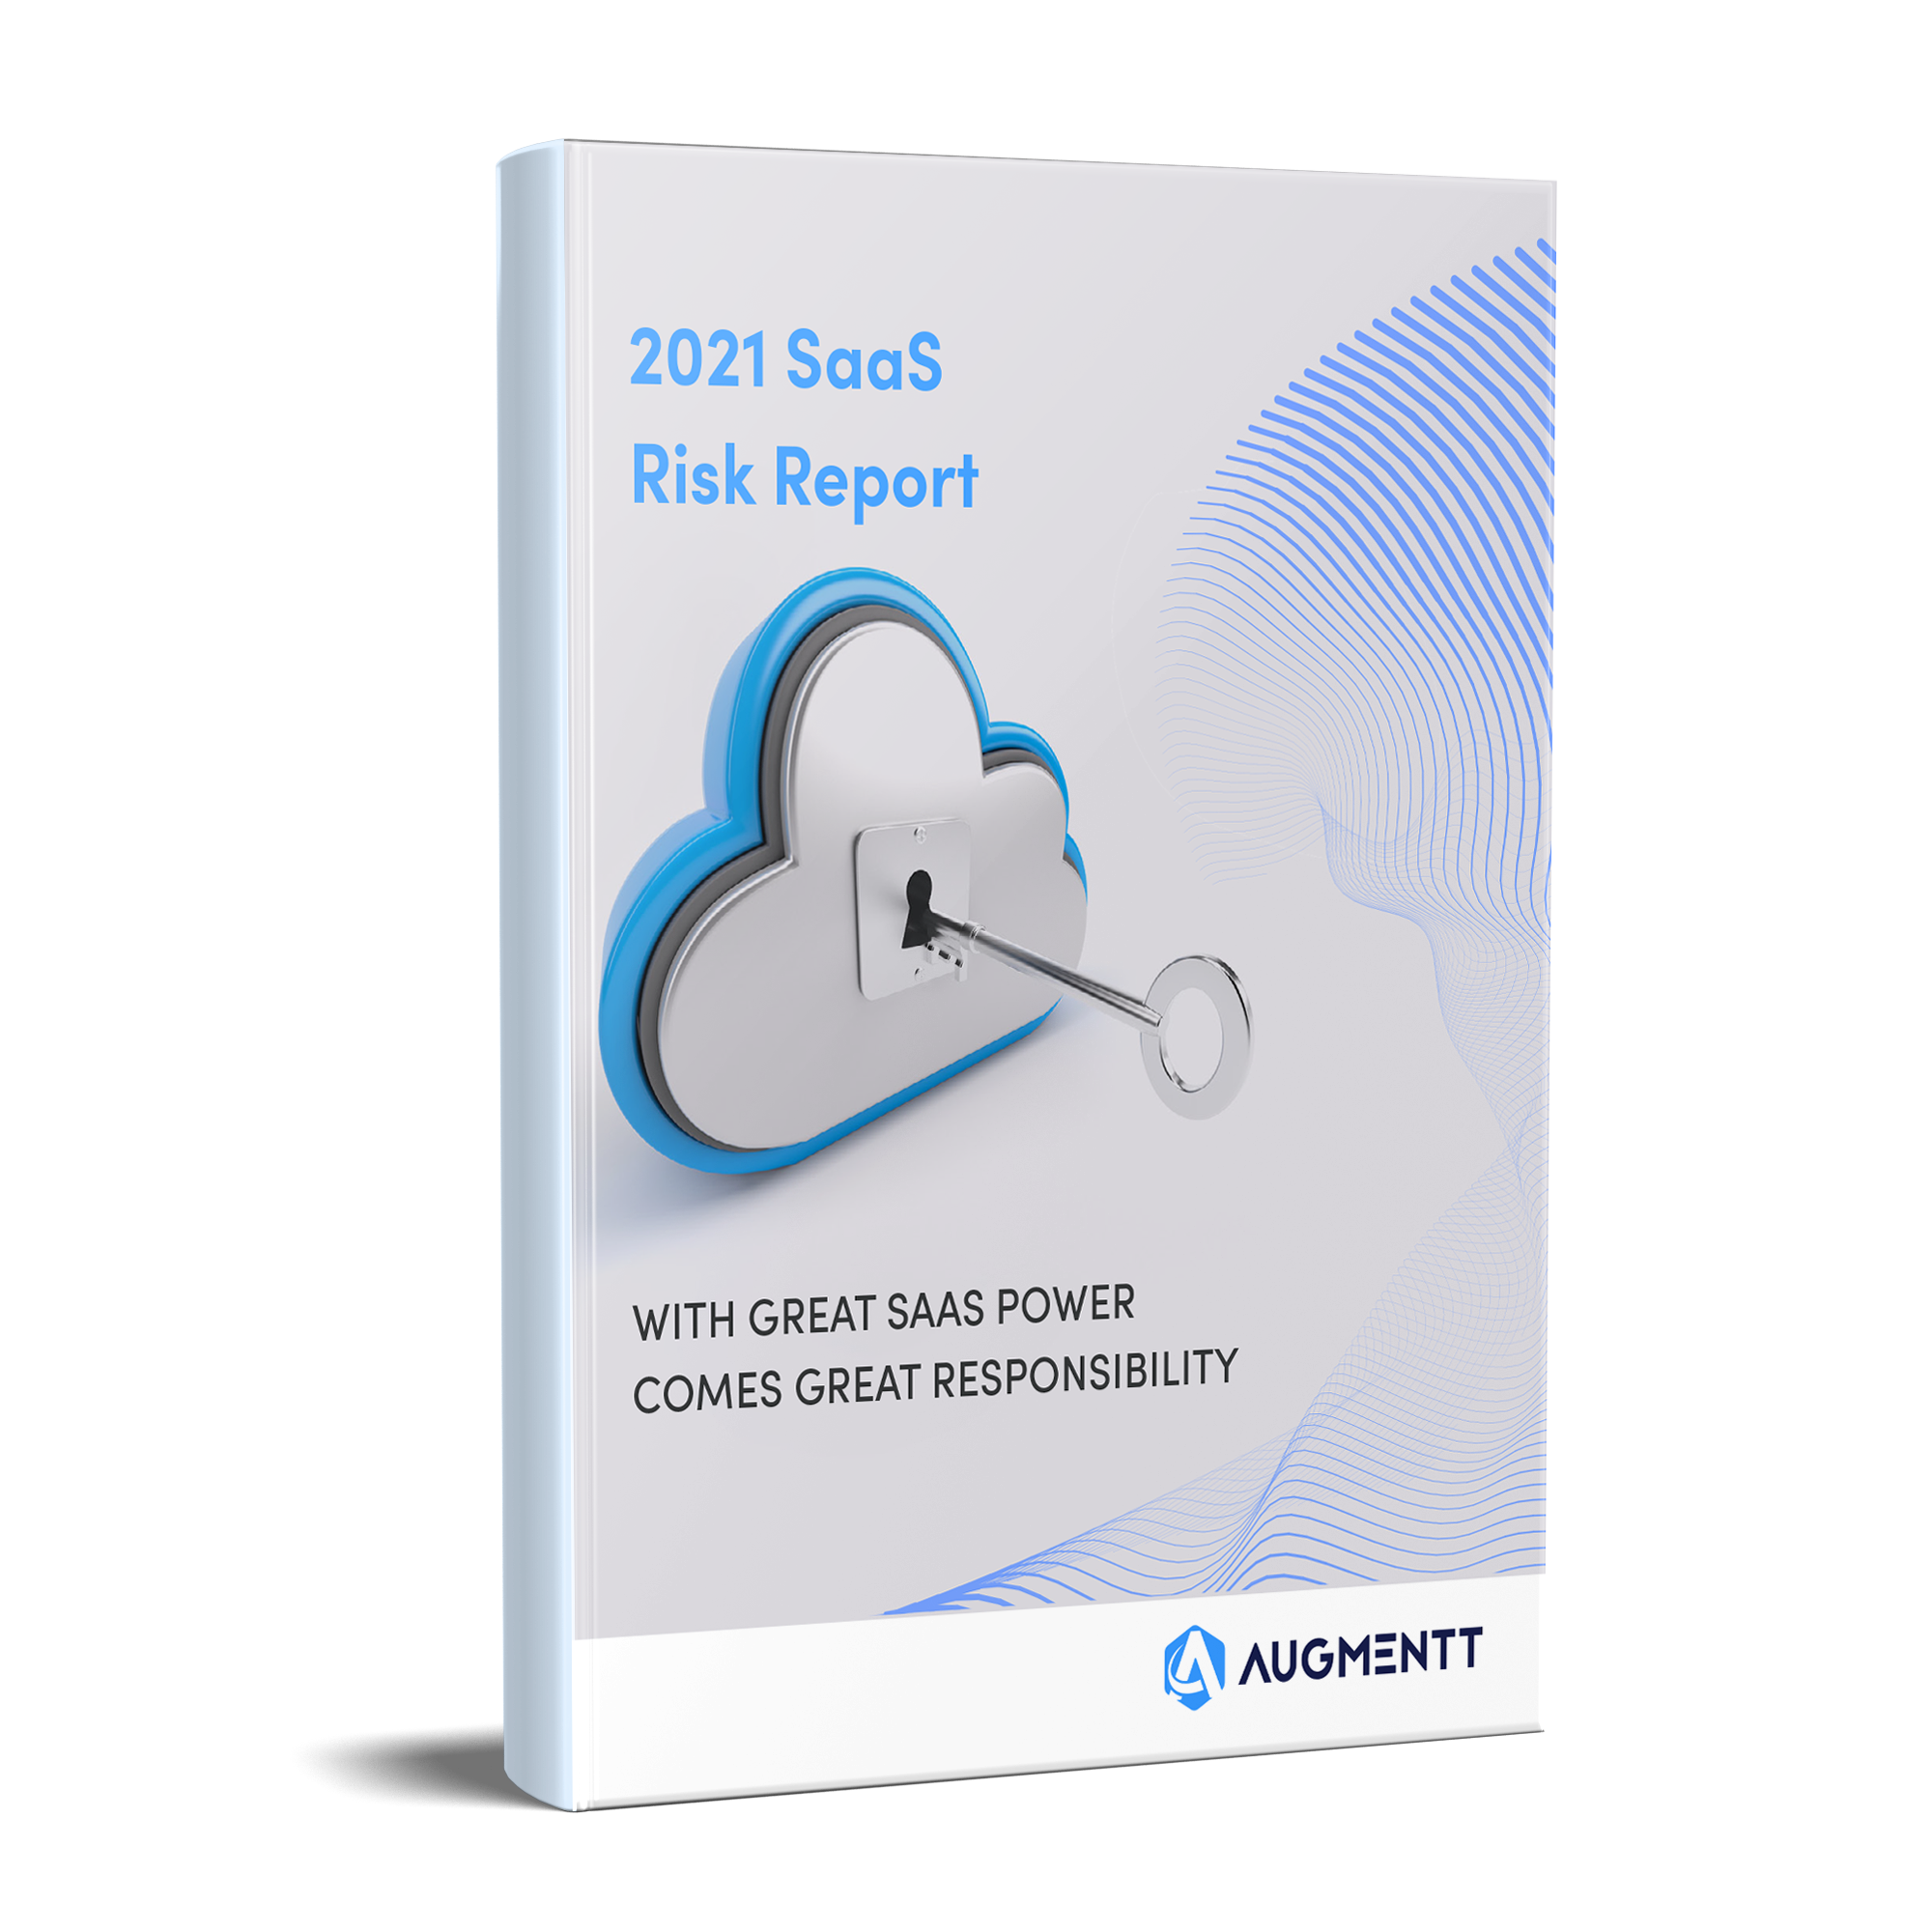 https://www.augmentt.com/wp-content/uploads/2021/10/2021-saas-risk-report-large-cover.png